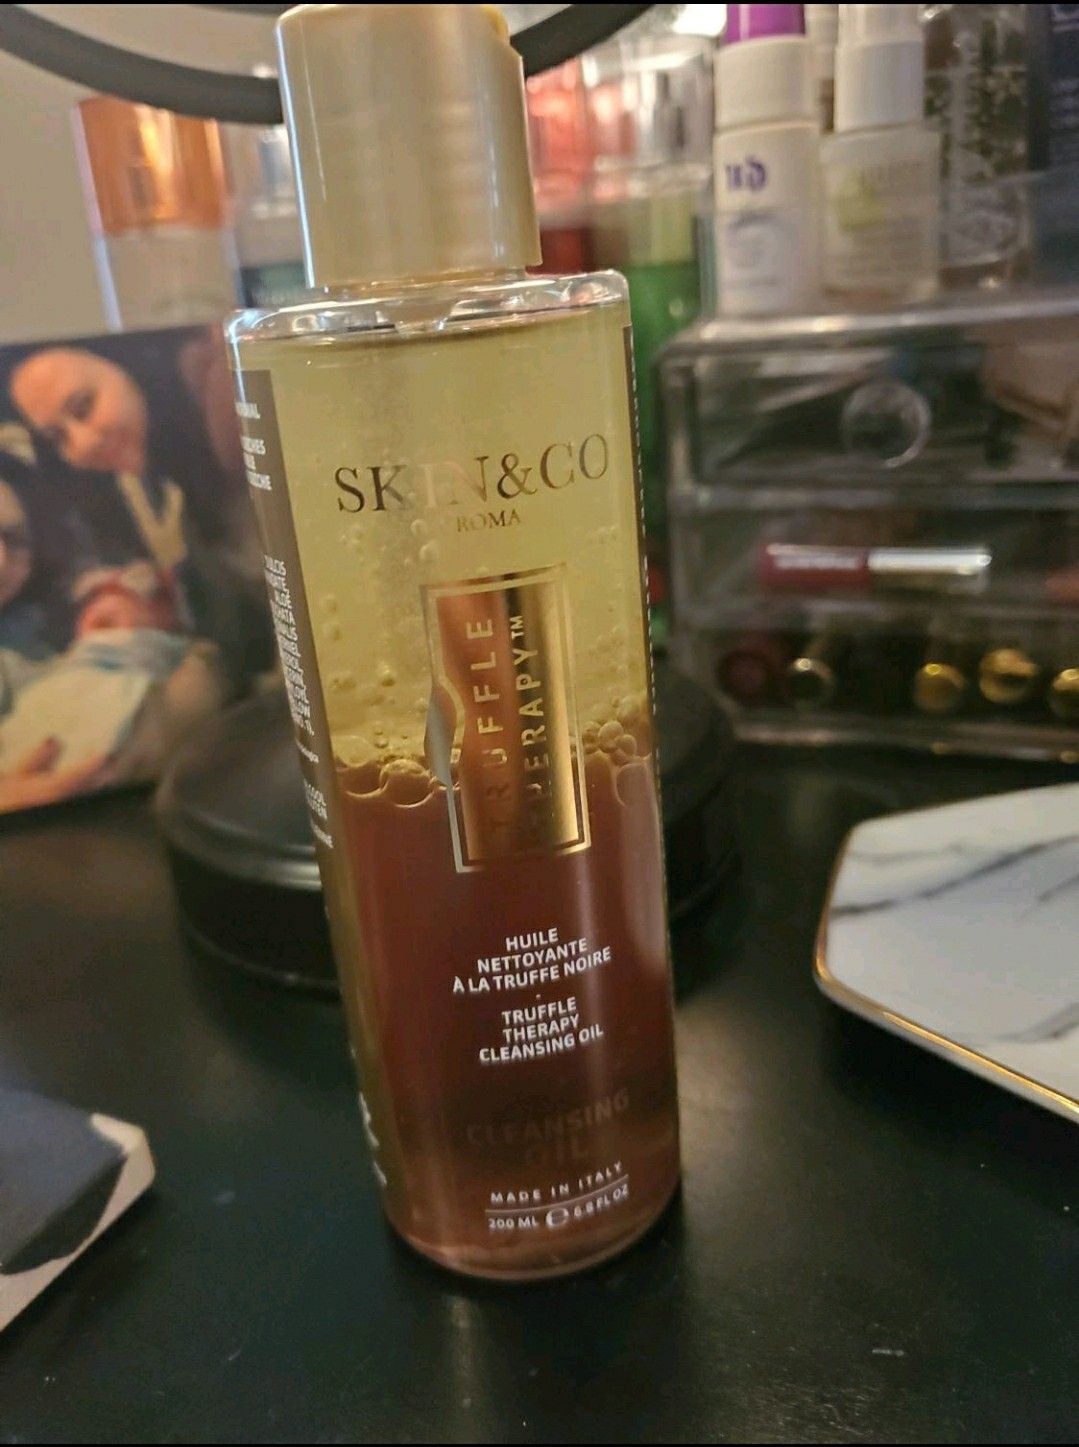 Skin & Co Roma Truffle therapy cleansing oil. Brand new. $10 Cross posted. Pickup near liberty Plaza